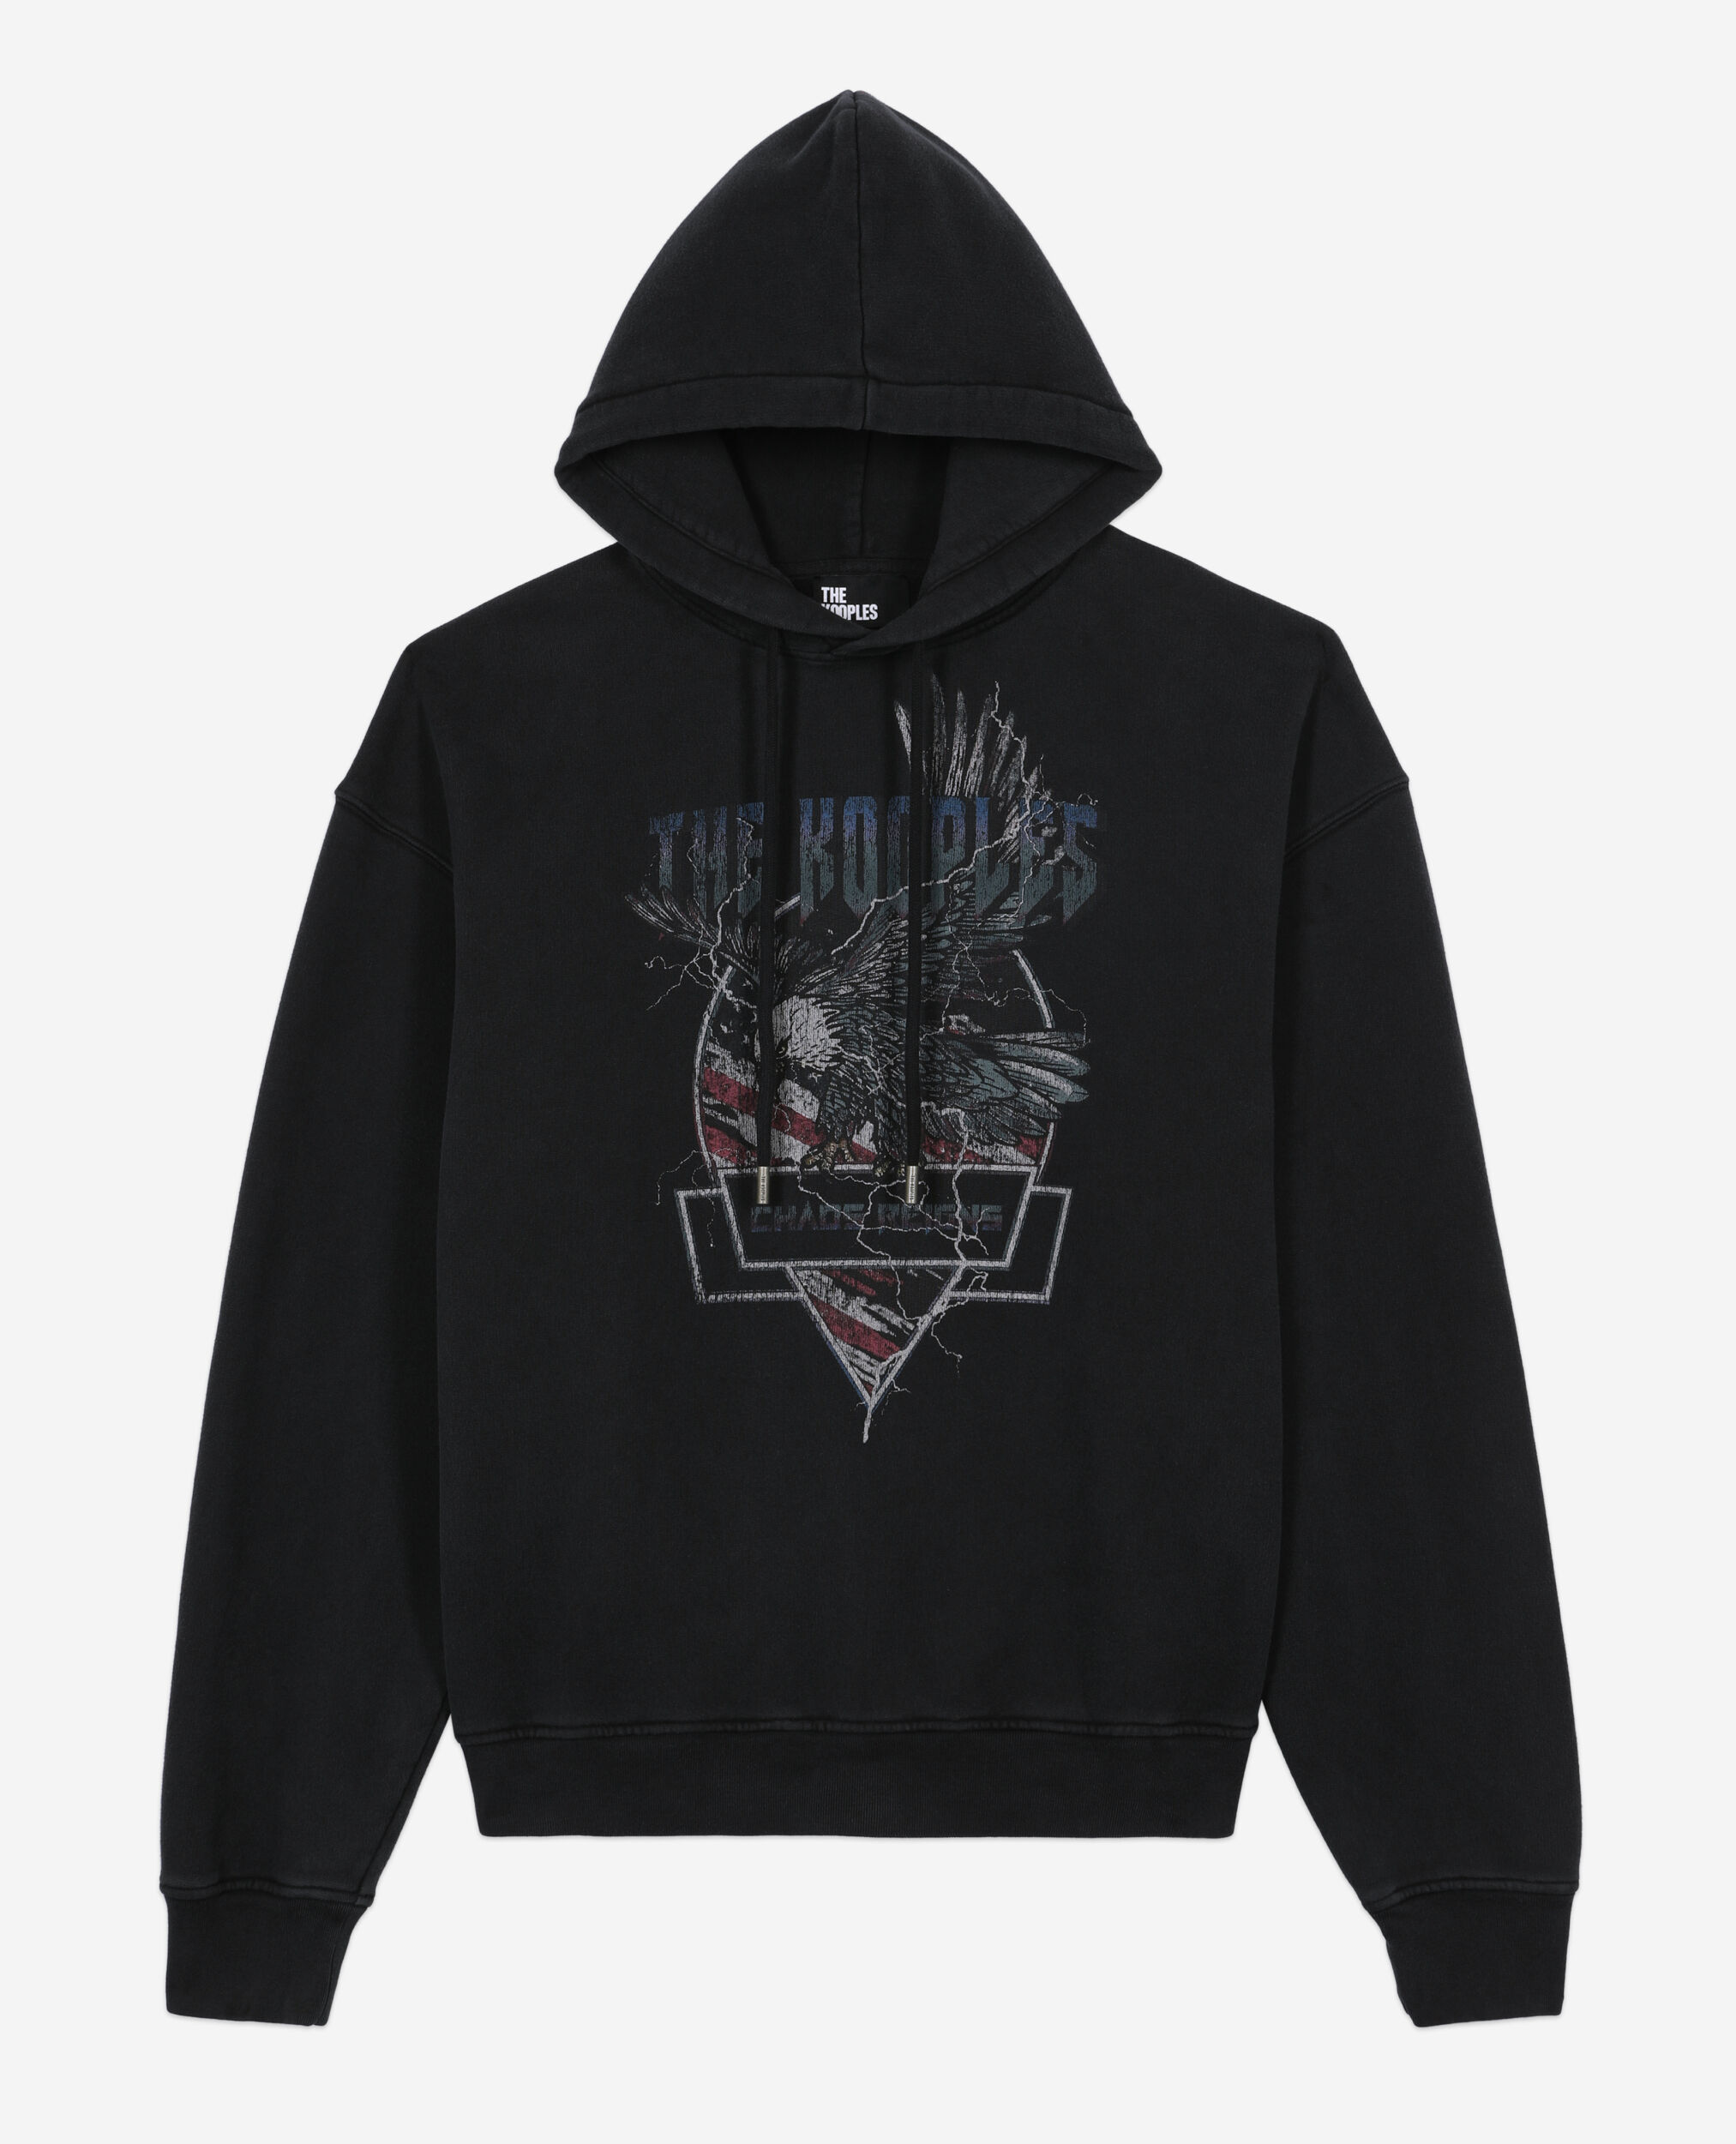 Black hoodie with Chaos eagle serigraphy, BLACK WASHED, hi-res image number null